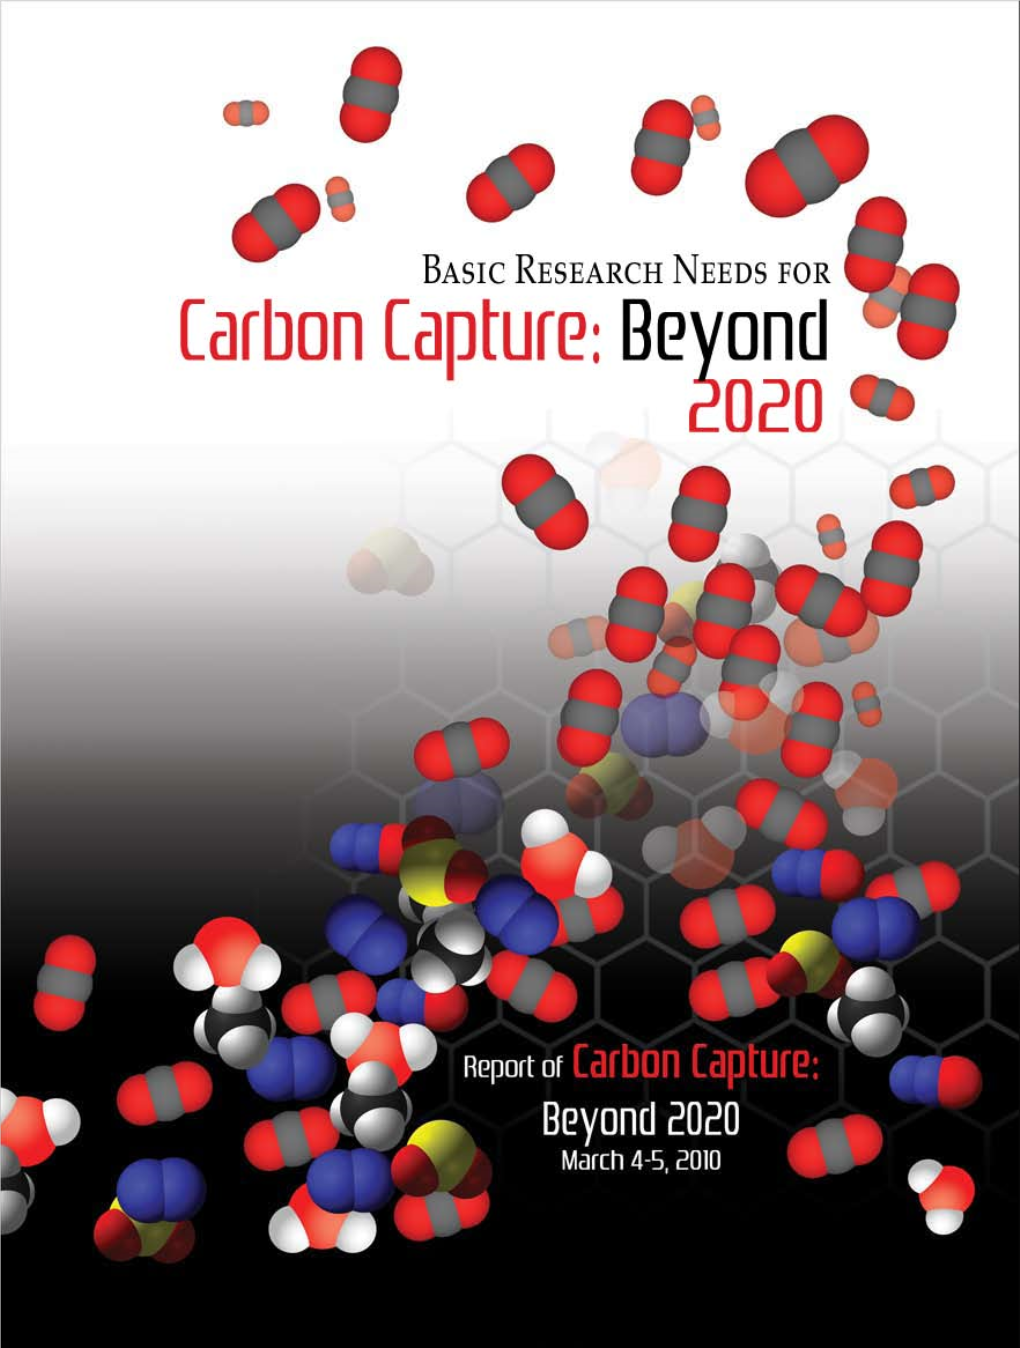 Basic Research Needs for Carbon Capture: Beyond 2020